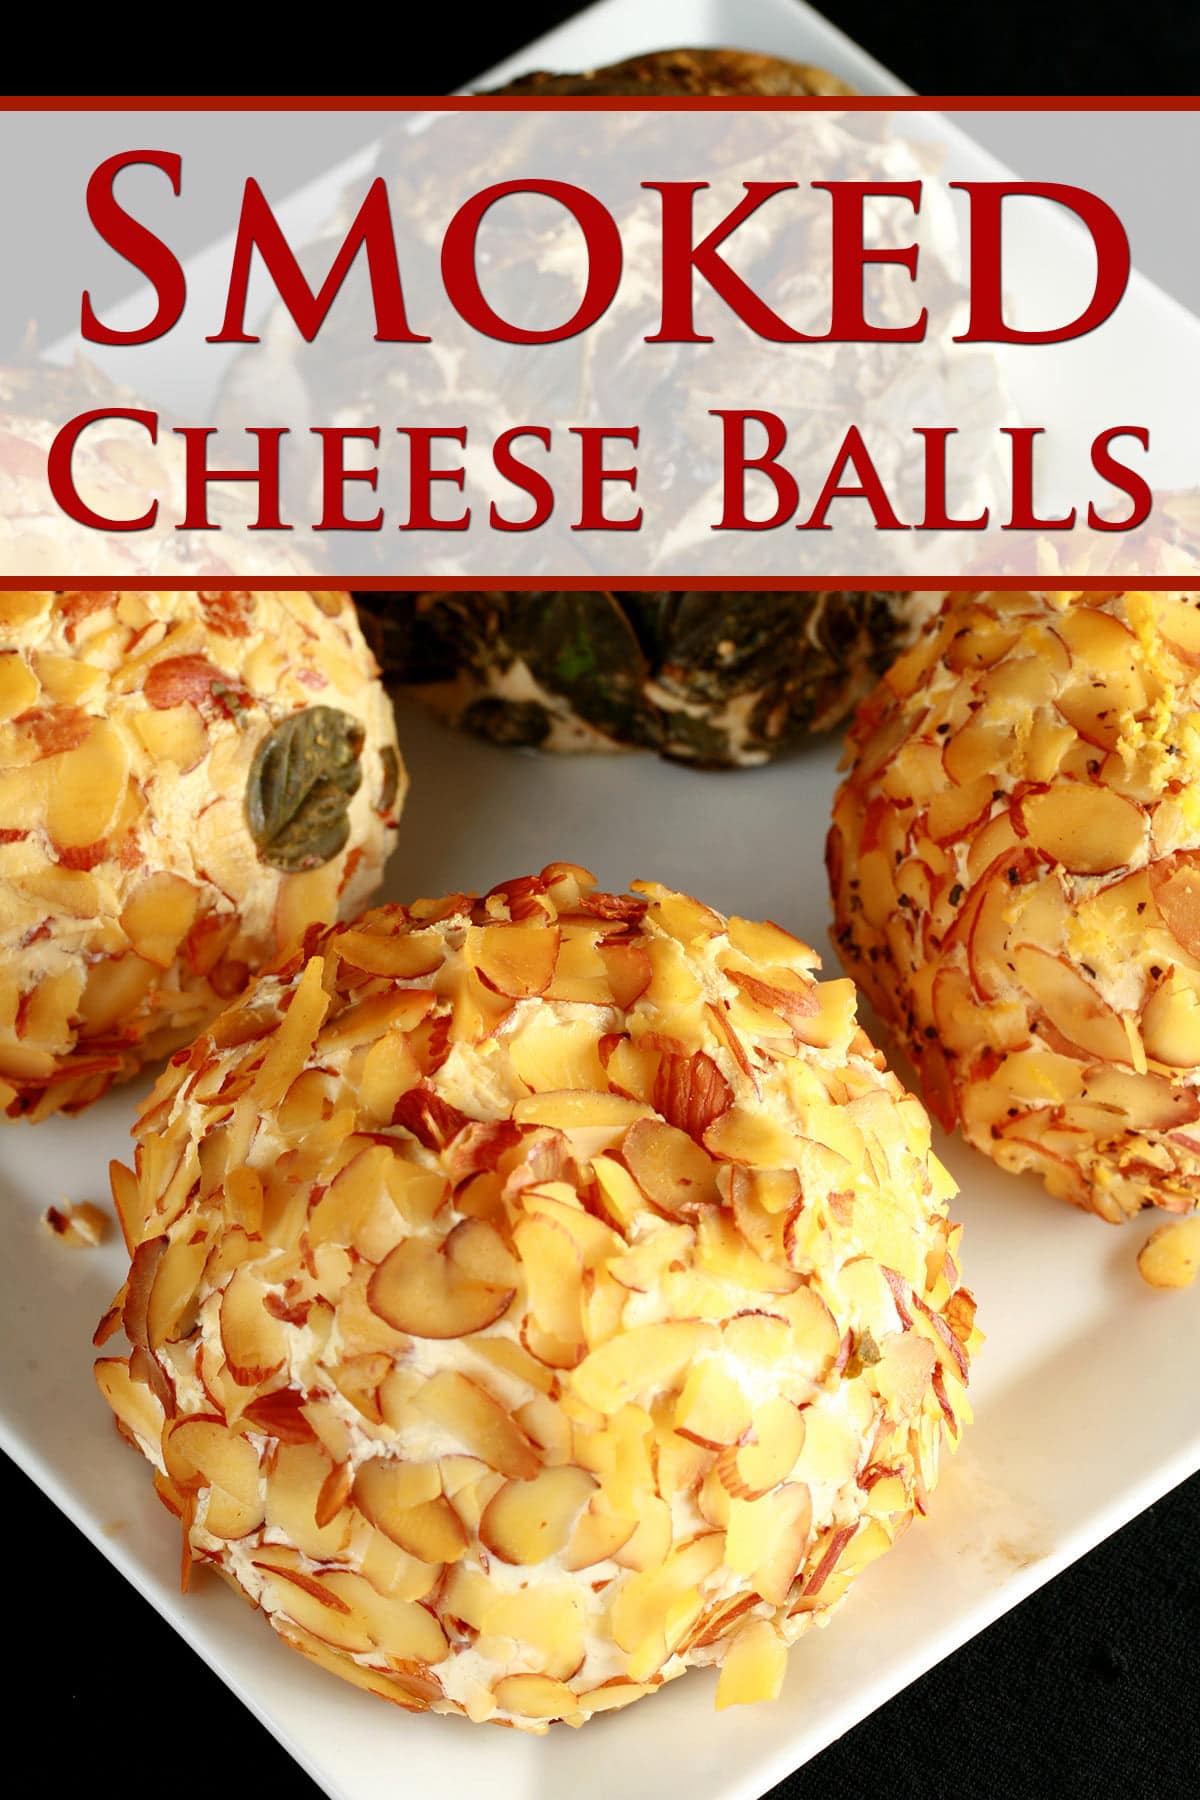 4 smoked cheese balls - with various coatings - are arranged on a plate.